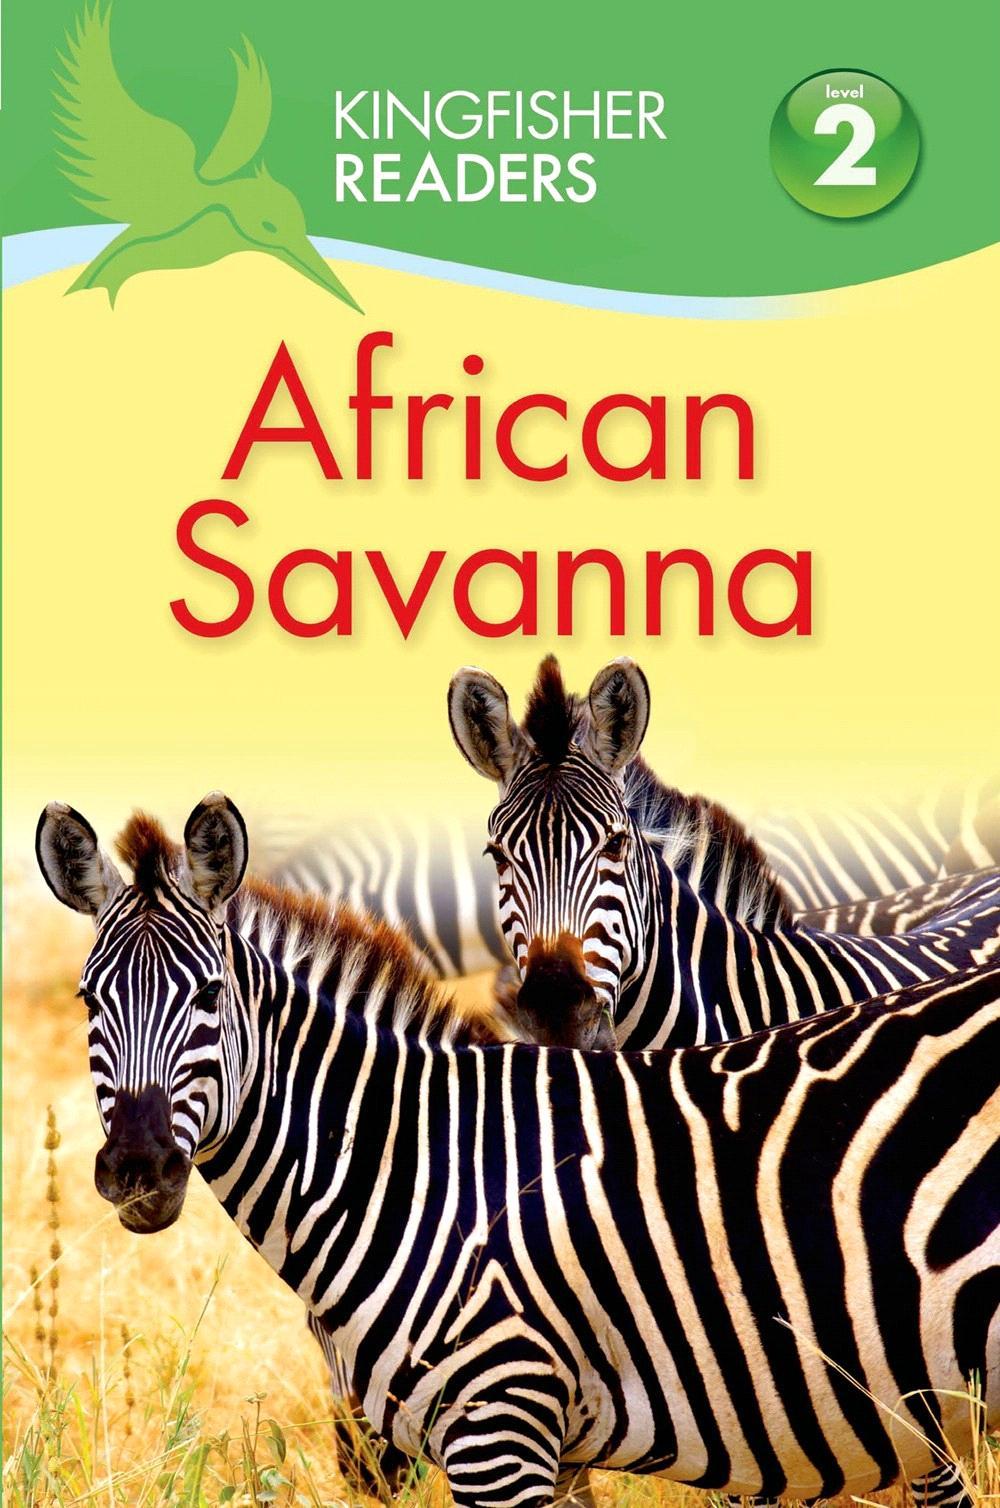 KINGFISHER 2015 JUVENILE NONFICTION / SCIENCE & NATURE / EARTH SCIENCES BY THEA FELDMAN Readers L2: African Savanna Exciting, engaging, AND informative.